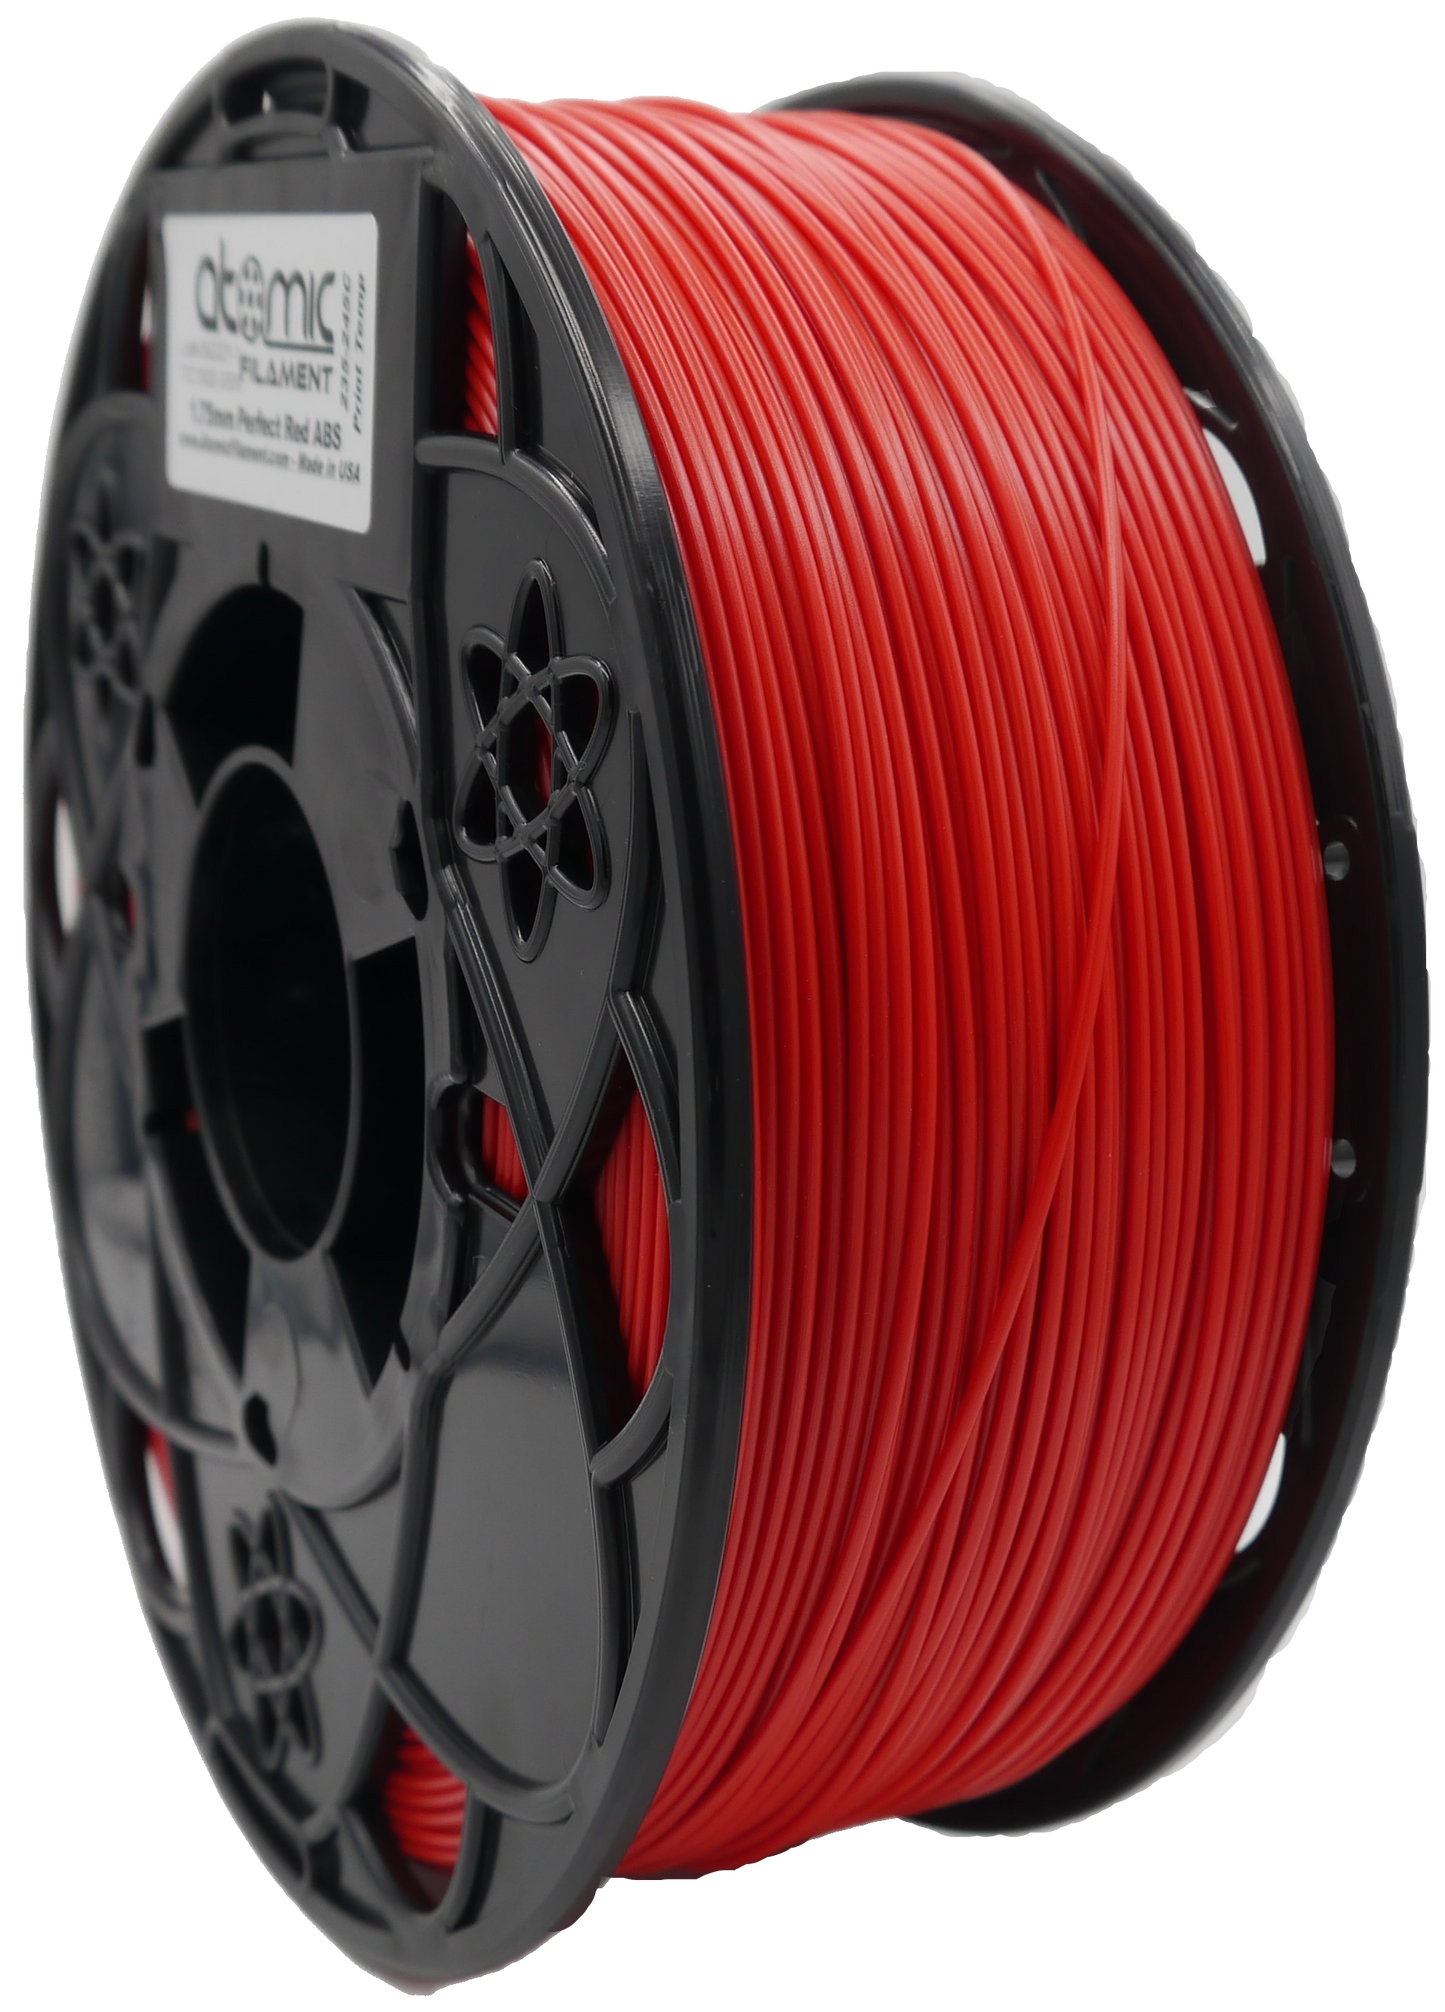 3.5KG Perfect Red ABS Filament